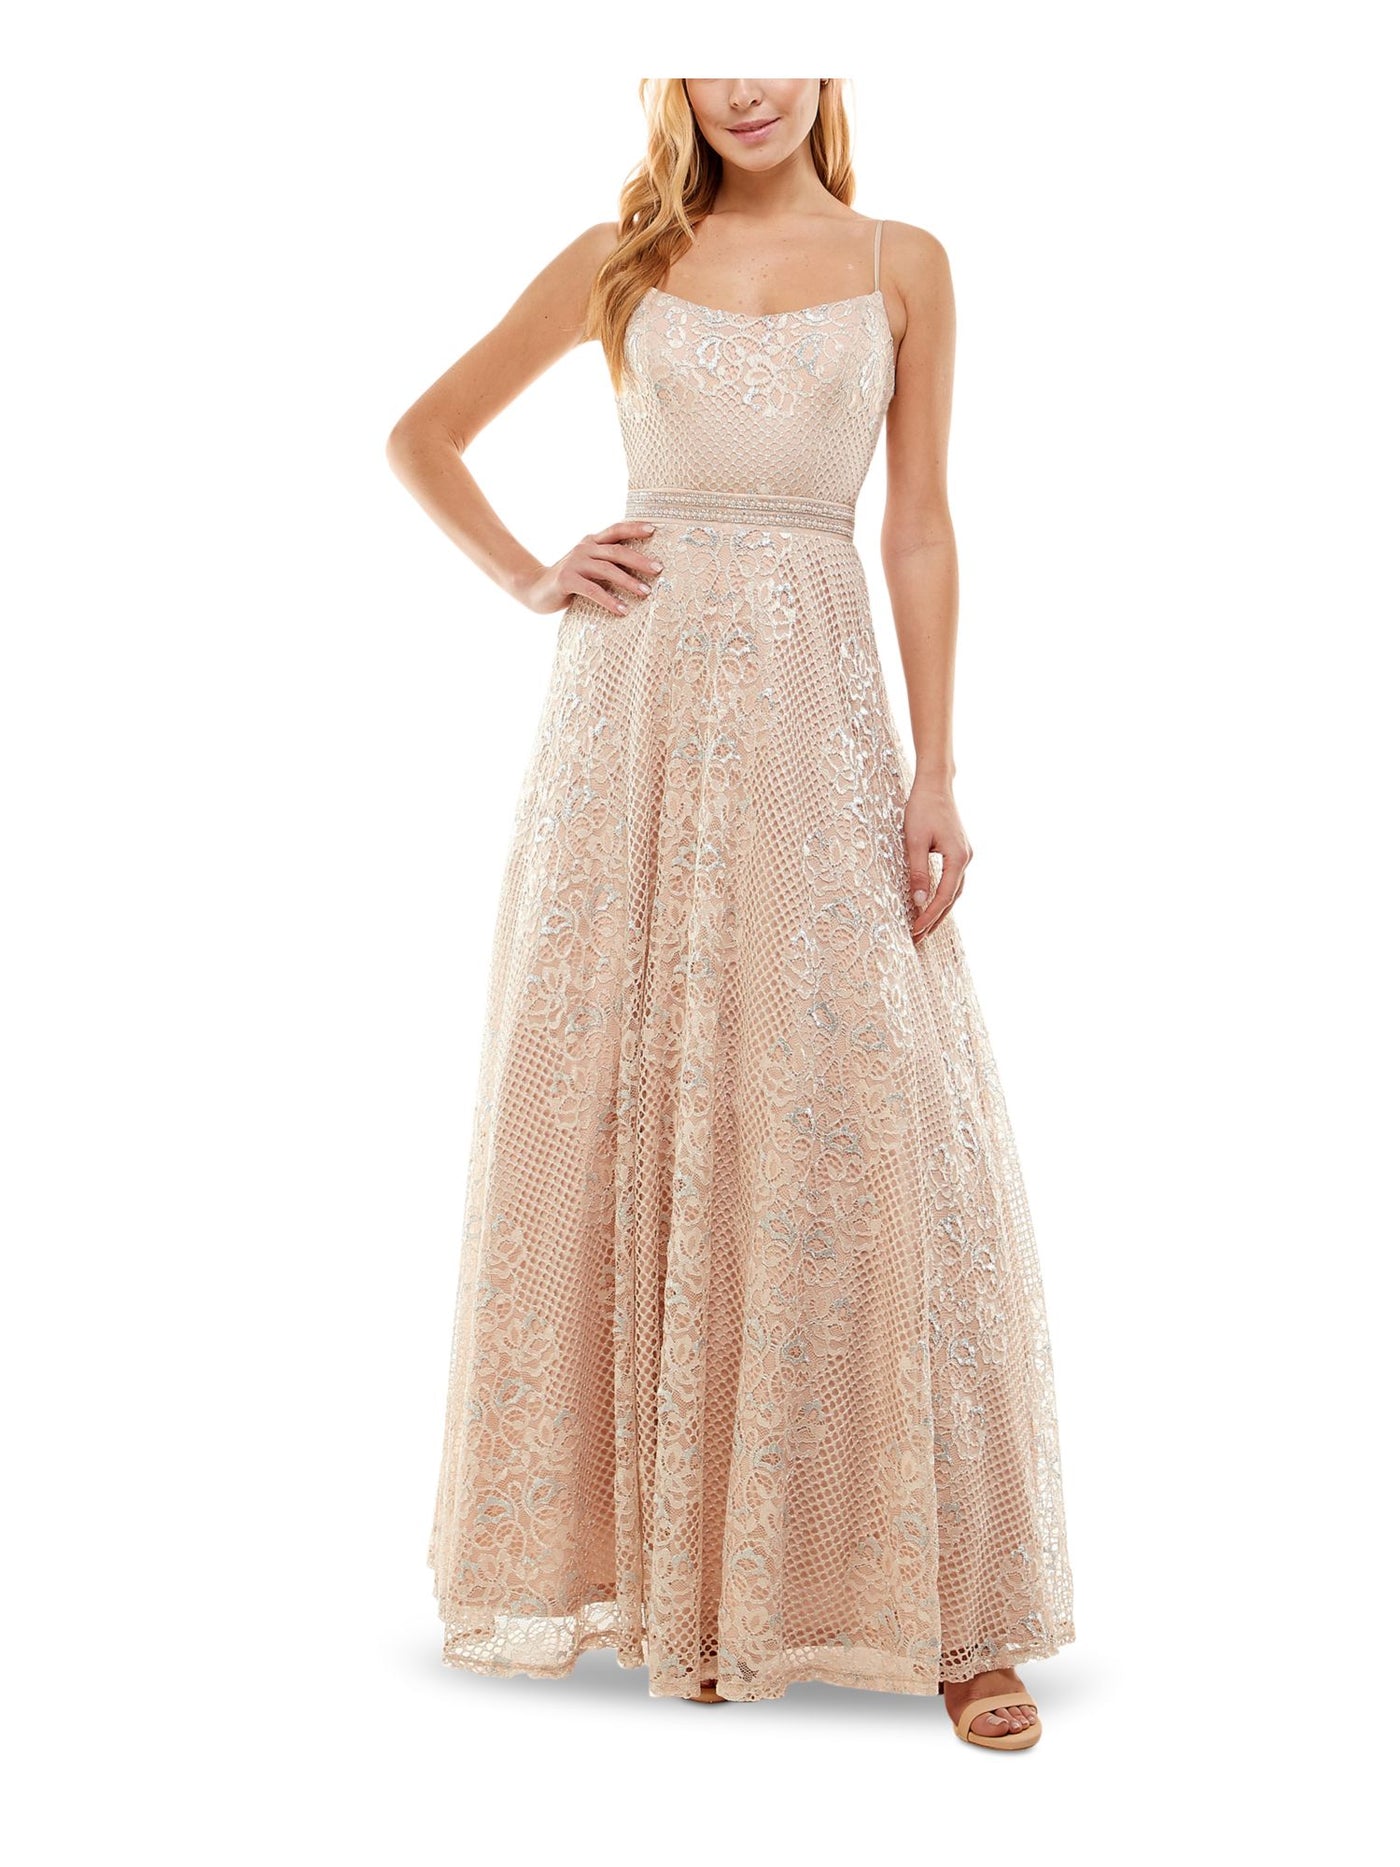 CITY STUDIO Womens Beige Zippered Metallic Lace Overlay Lined Floral Spaghetti Strap Scoop Neck Full-Length Cocktail Gown Dress Juniors 11